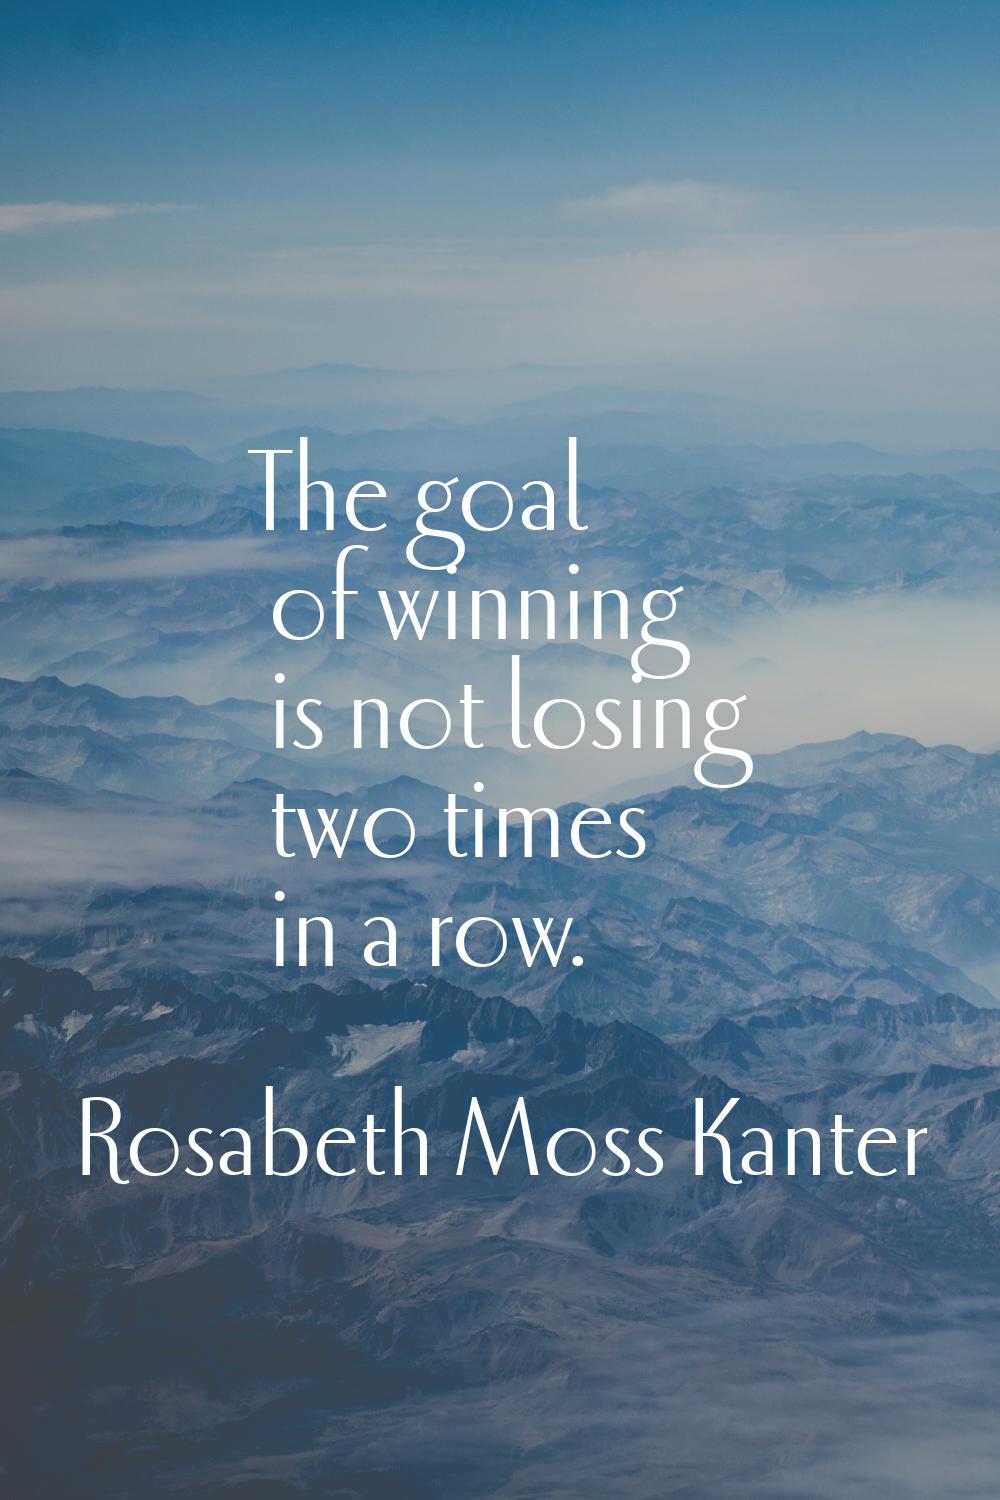 The goal of winning is not losing two times in a row.